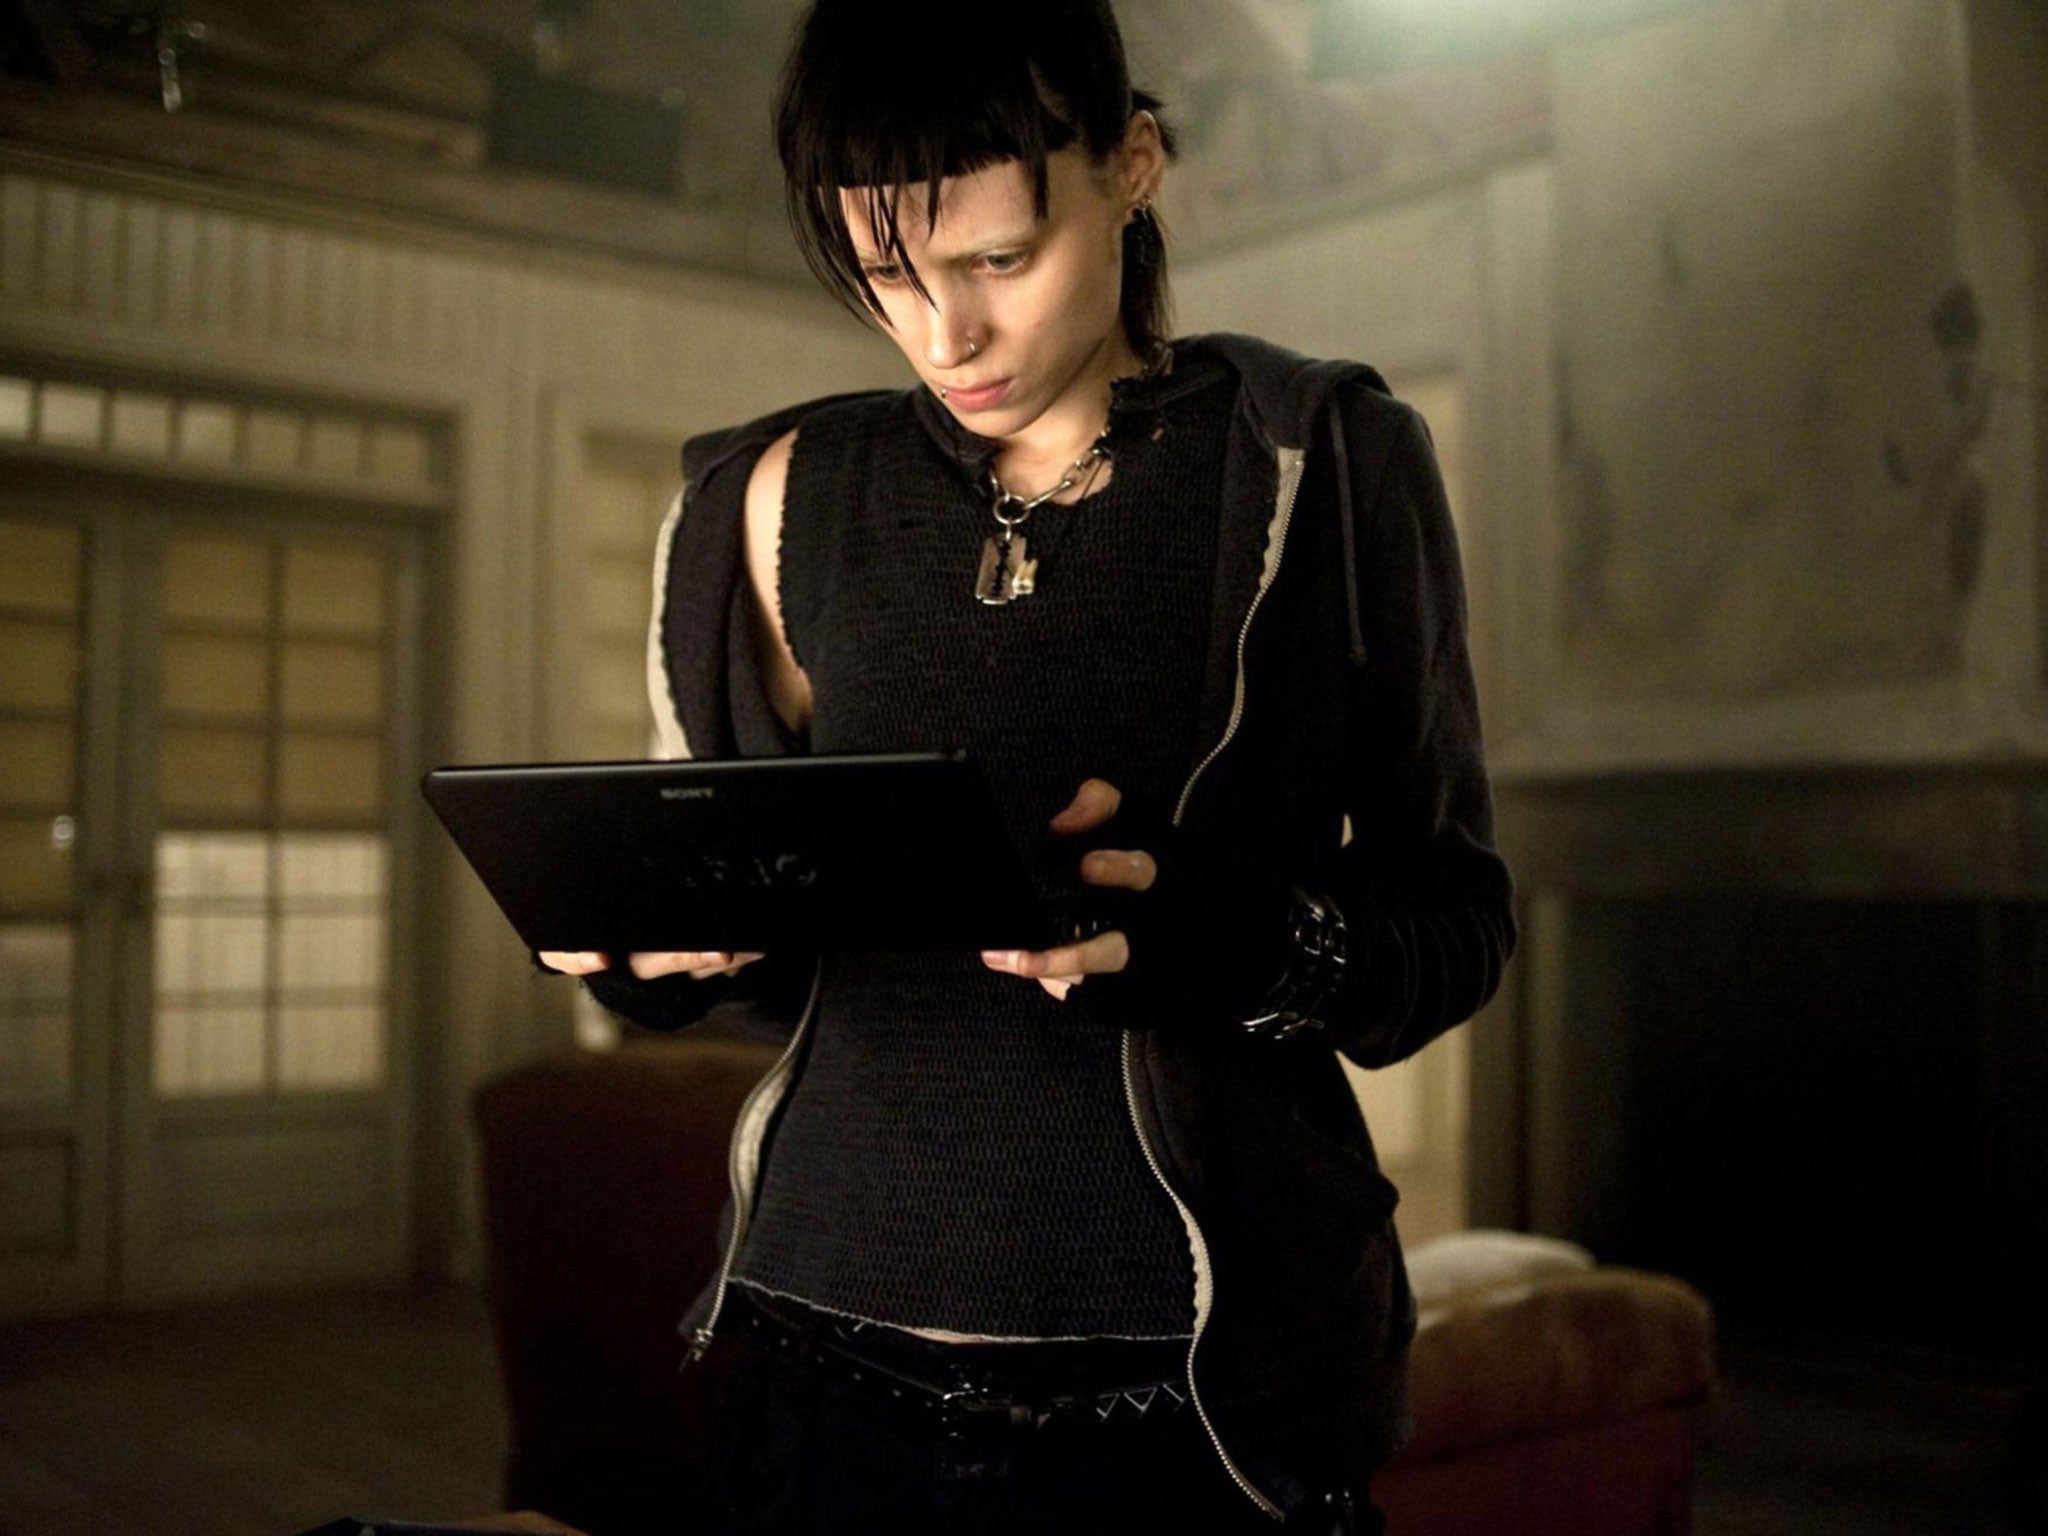 Rooney Mara as Lisbeth Salander in the film version of Girl with a Dragon Tattoo